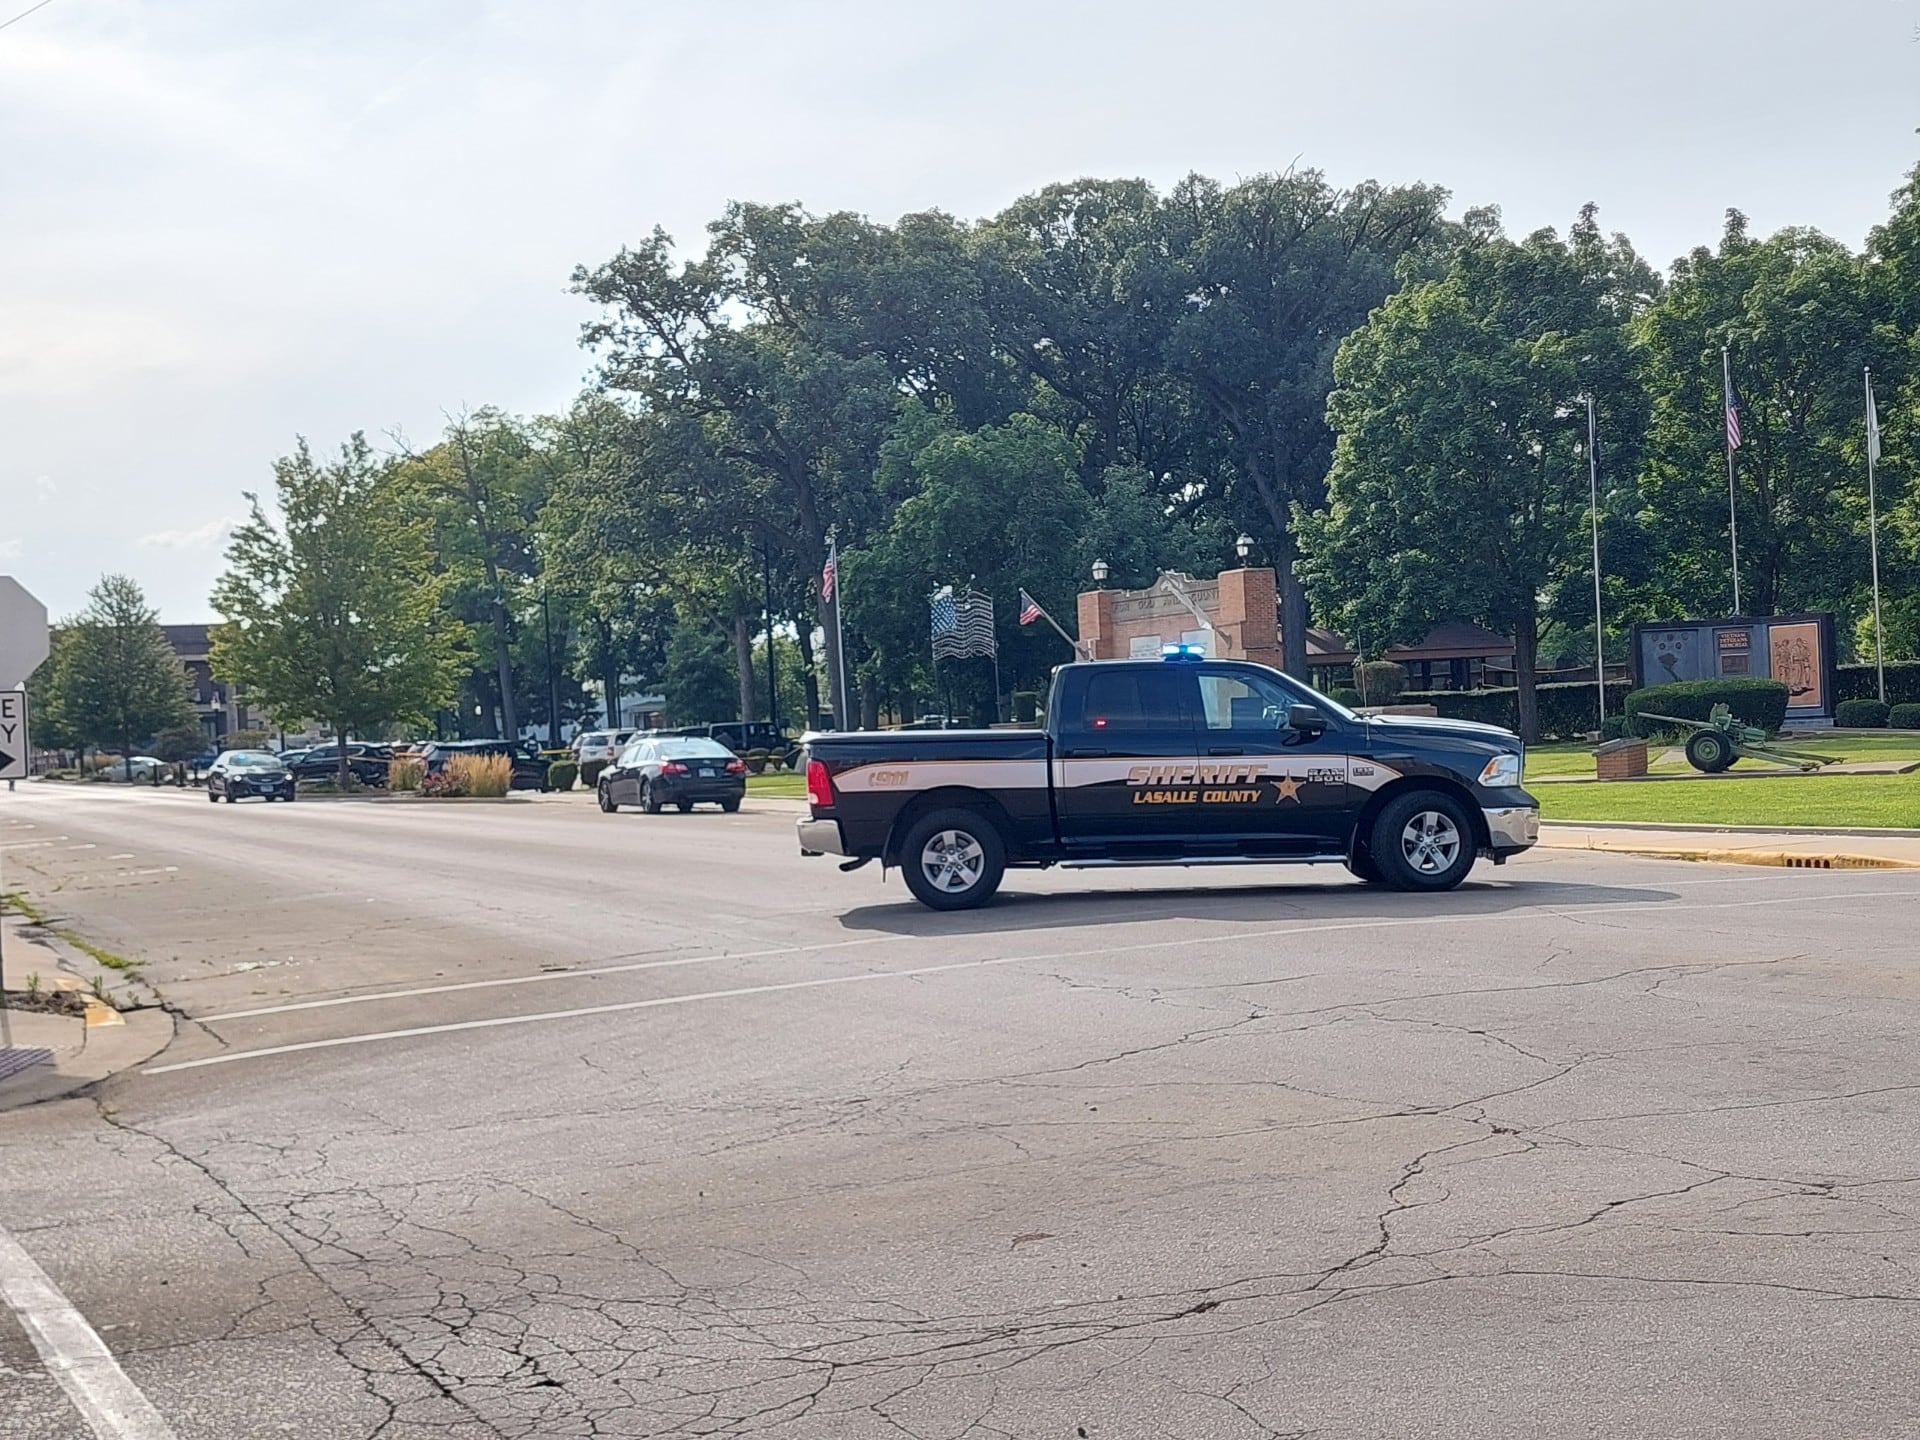 Man shot after altercation at City Park in Streator, police seize suspect vehicle 